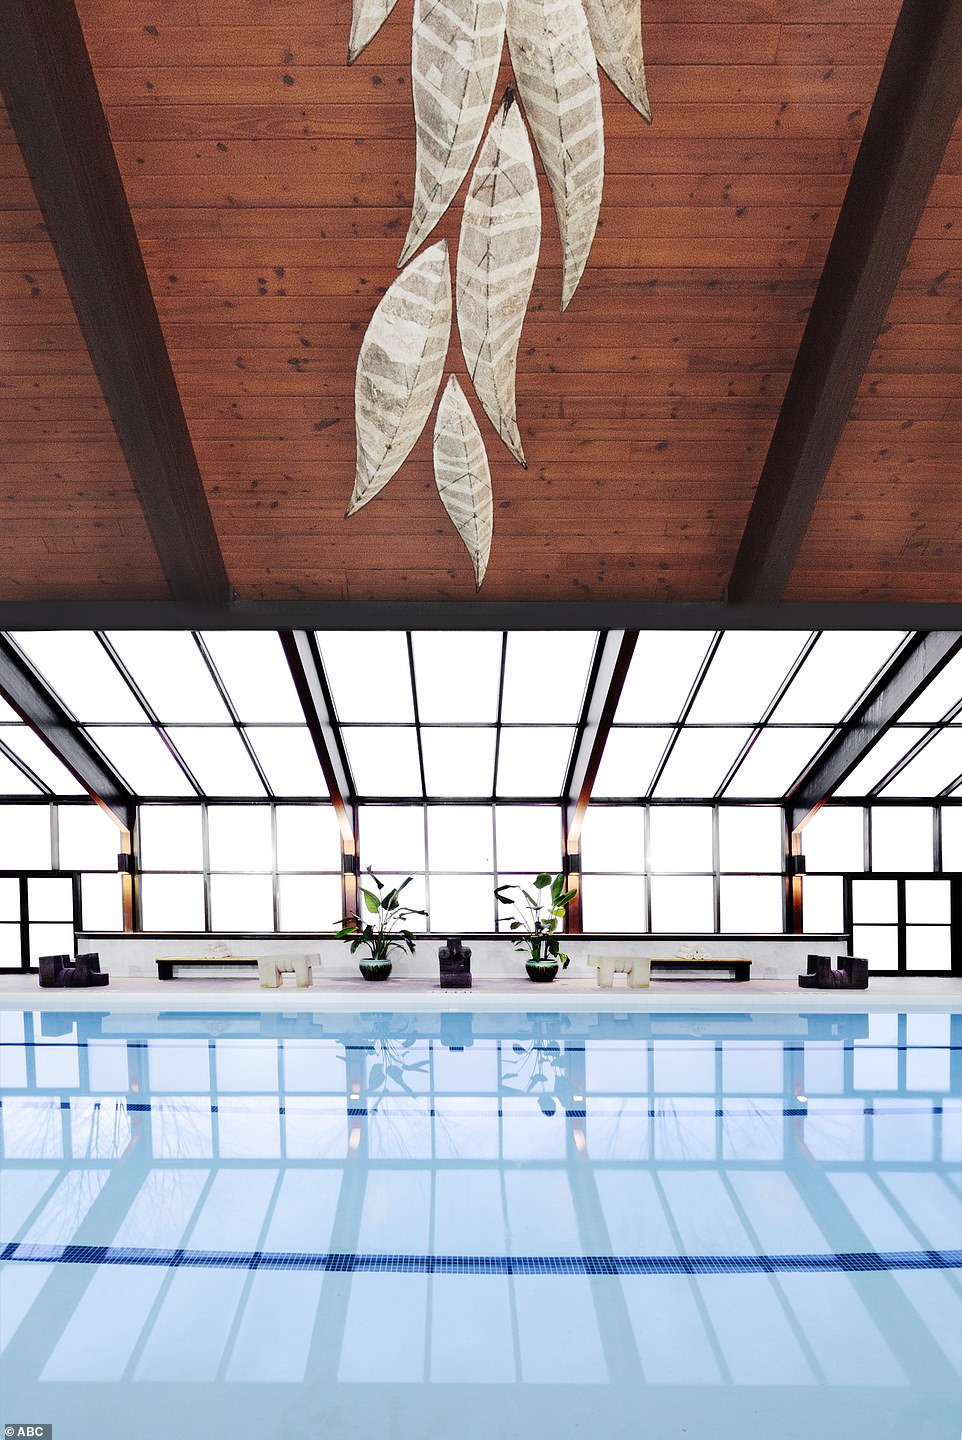 Making a splash! Visitors can take a lap around the indoor pool